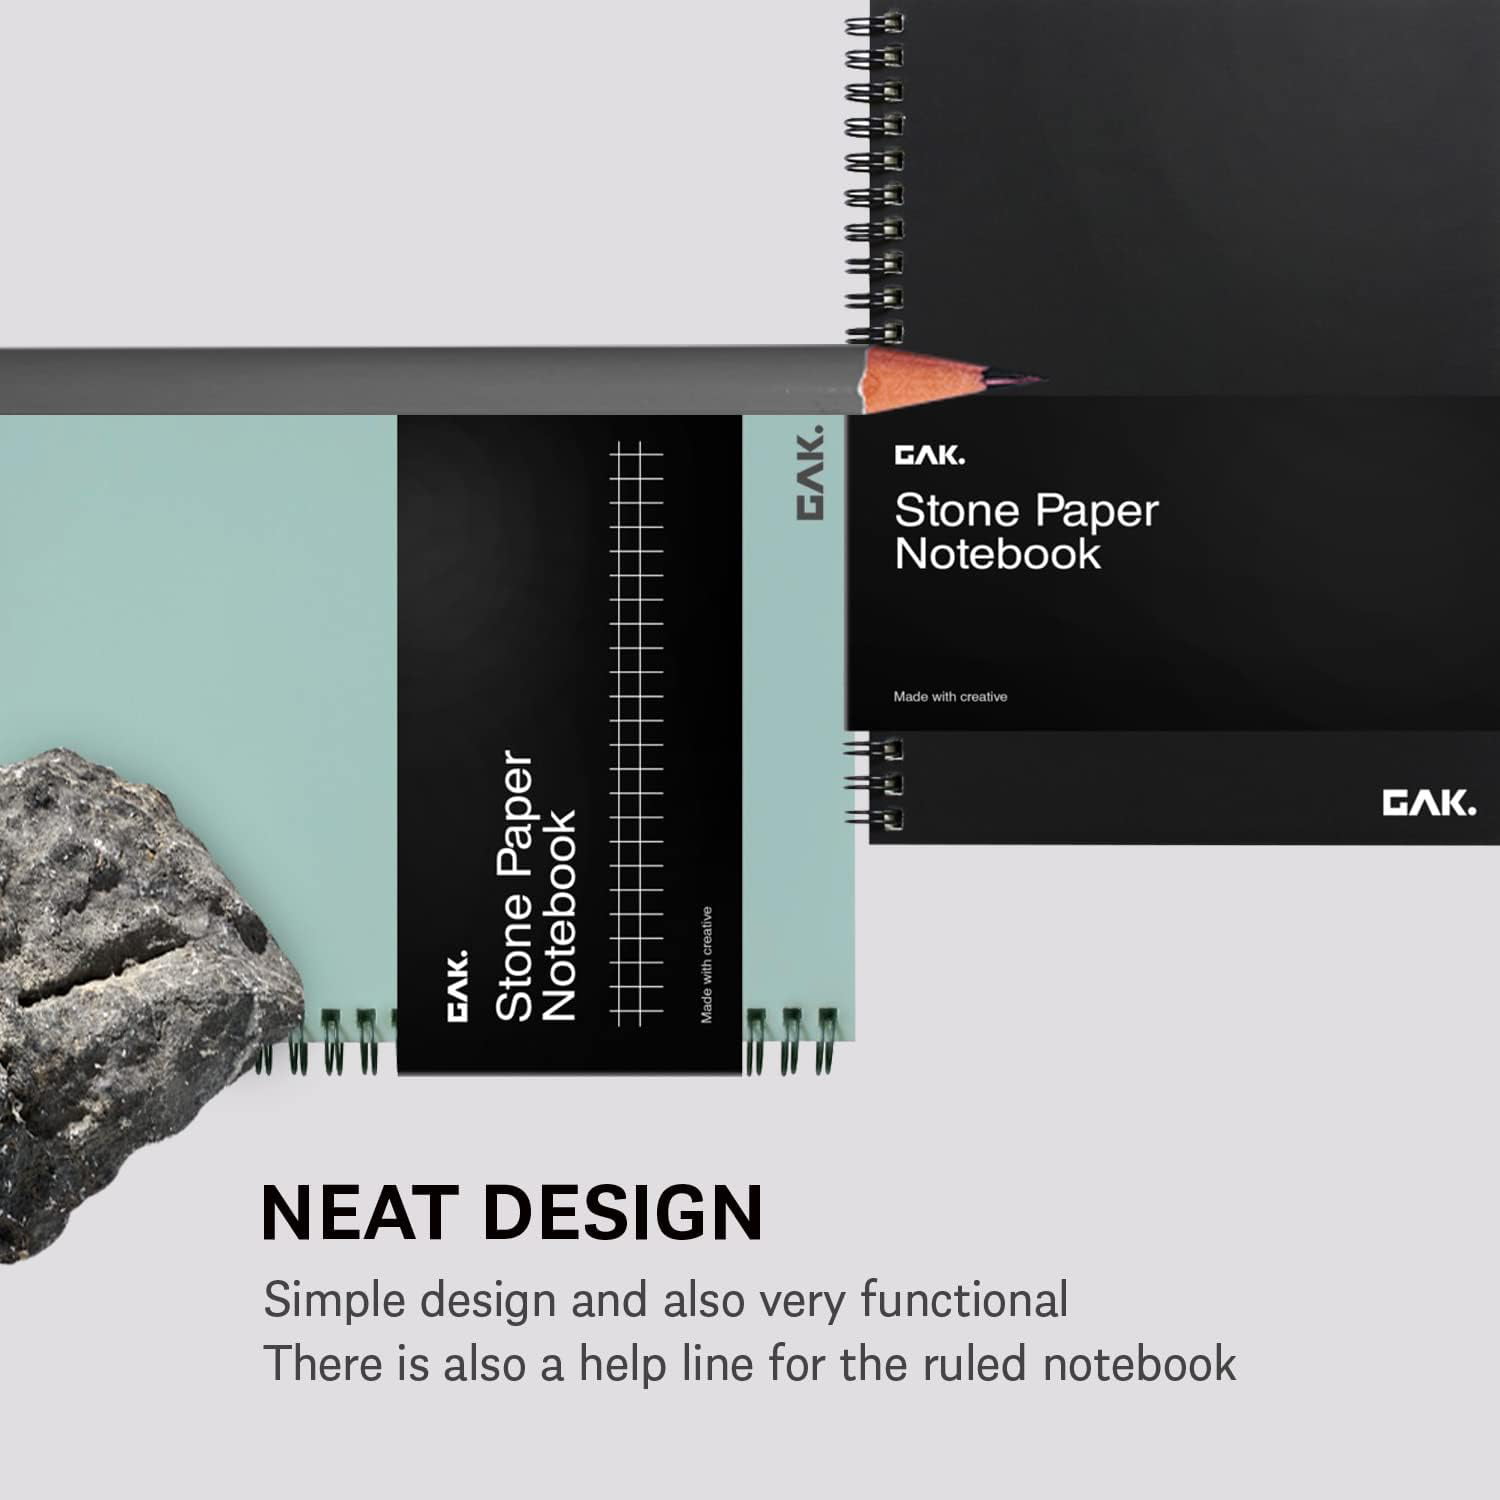 GAK. Stone Paper Notebook | No Lines Spiral Notebook Waterproof Sheet Aesthetic Journal for Note Taking | Notebooks for Work & Aesthetic School